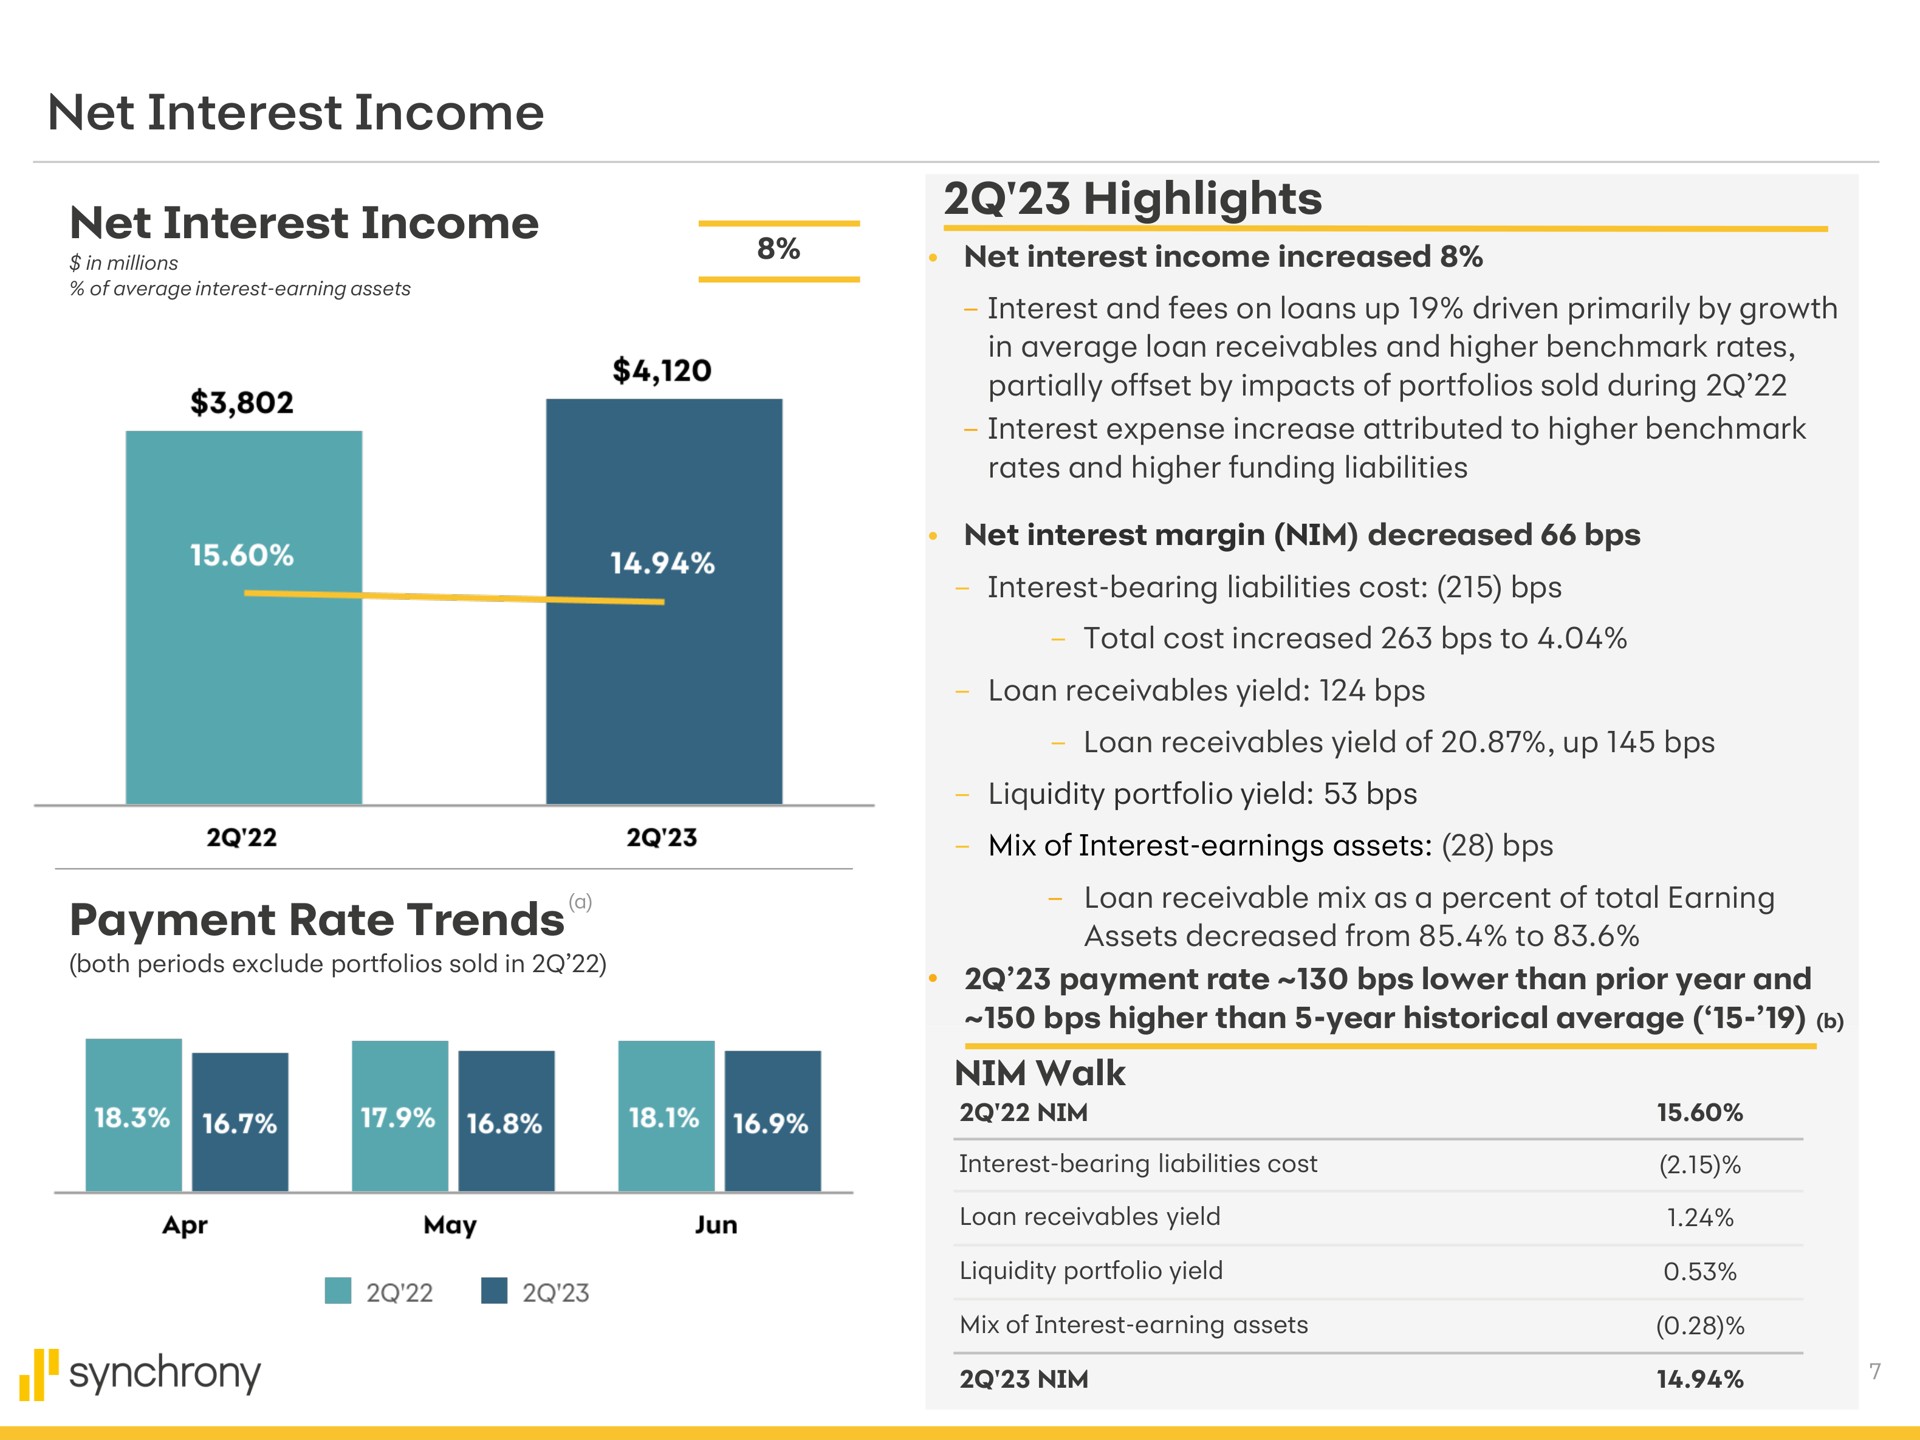 net interest income net interest income payment rate trends highlights nim walk synchrony | Synchrony Financial